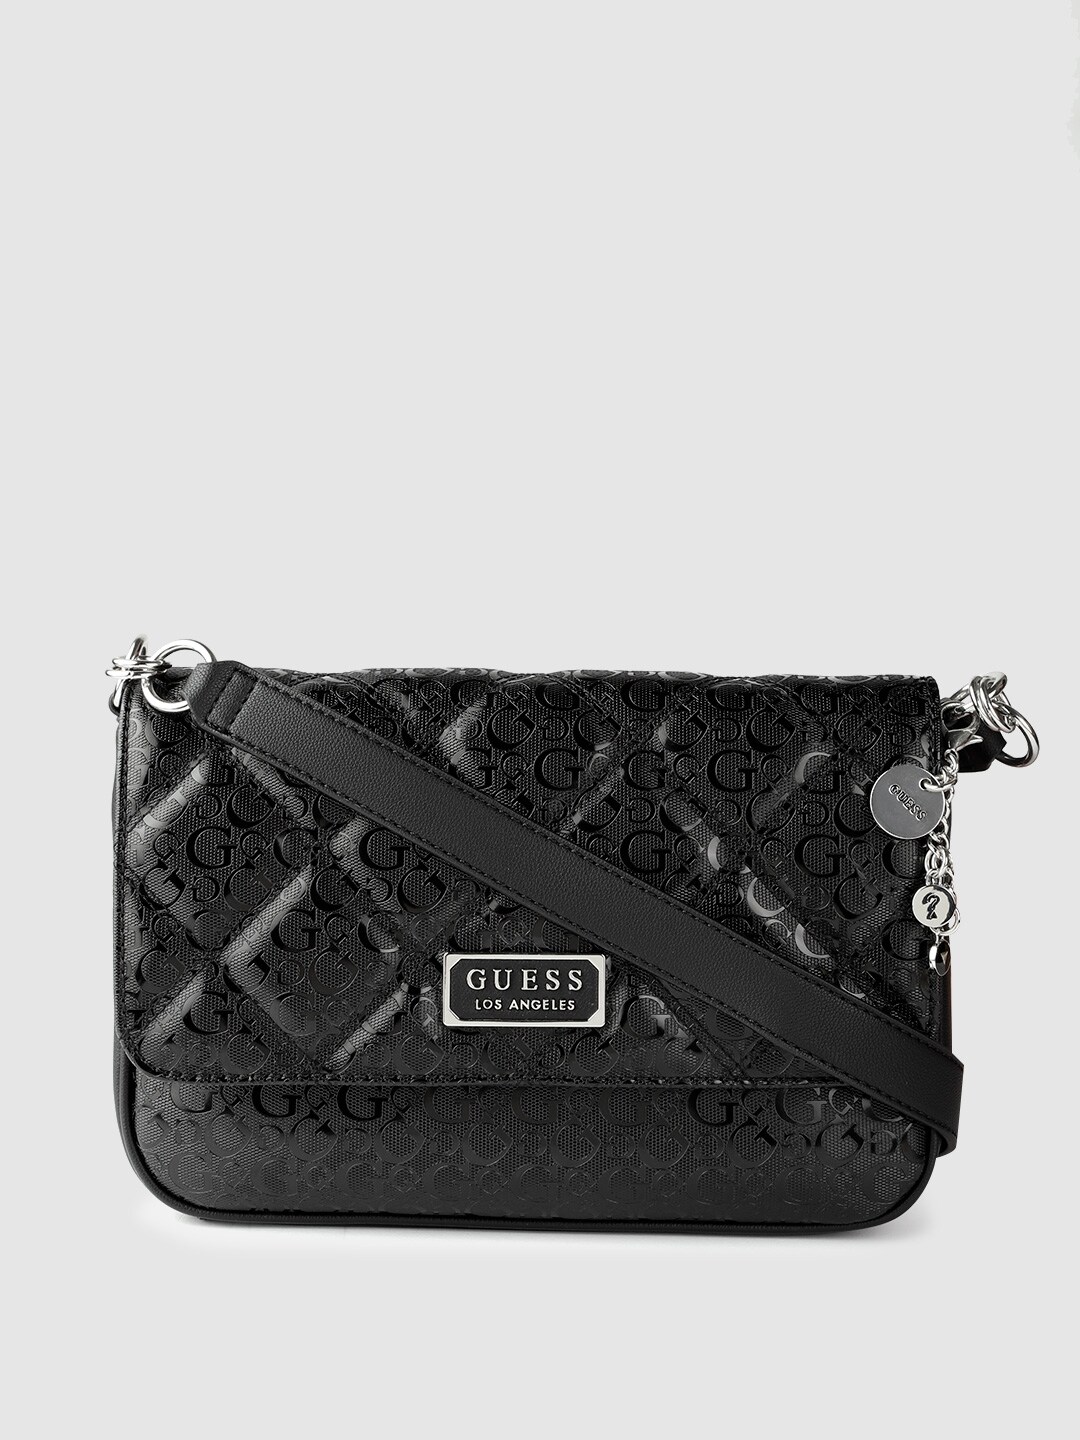 GUESS Women Black Brand Logo Textured Structured Sling Bag Price in India